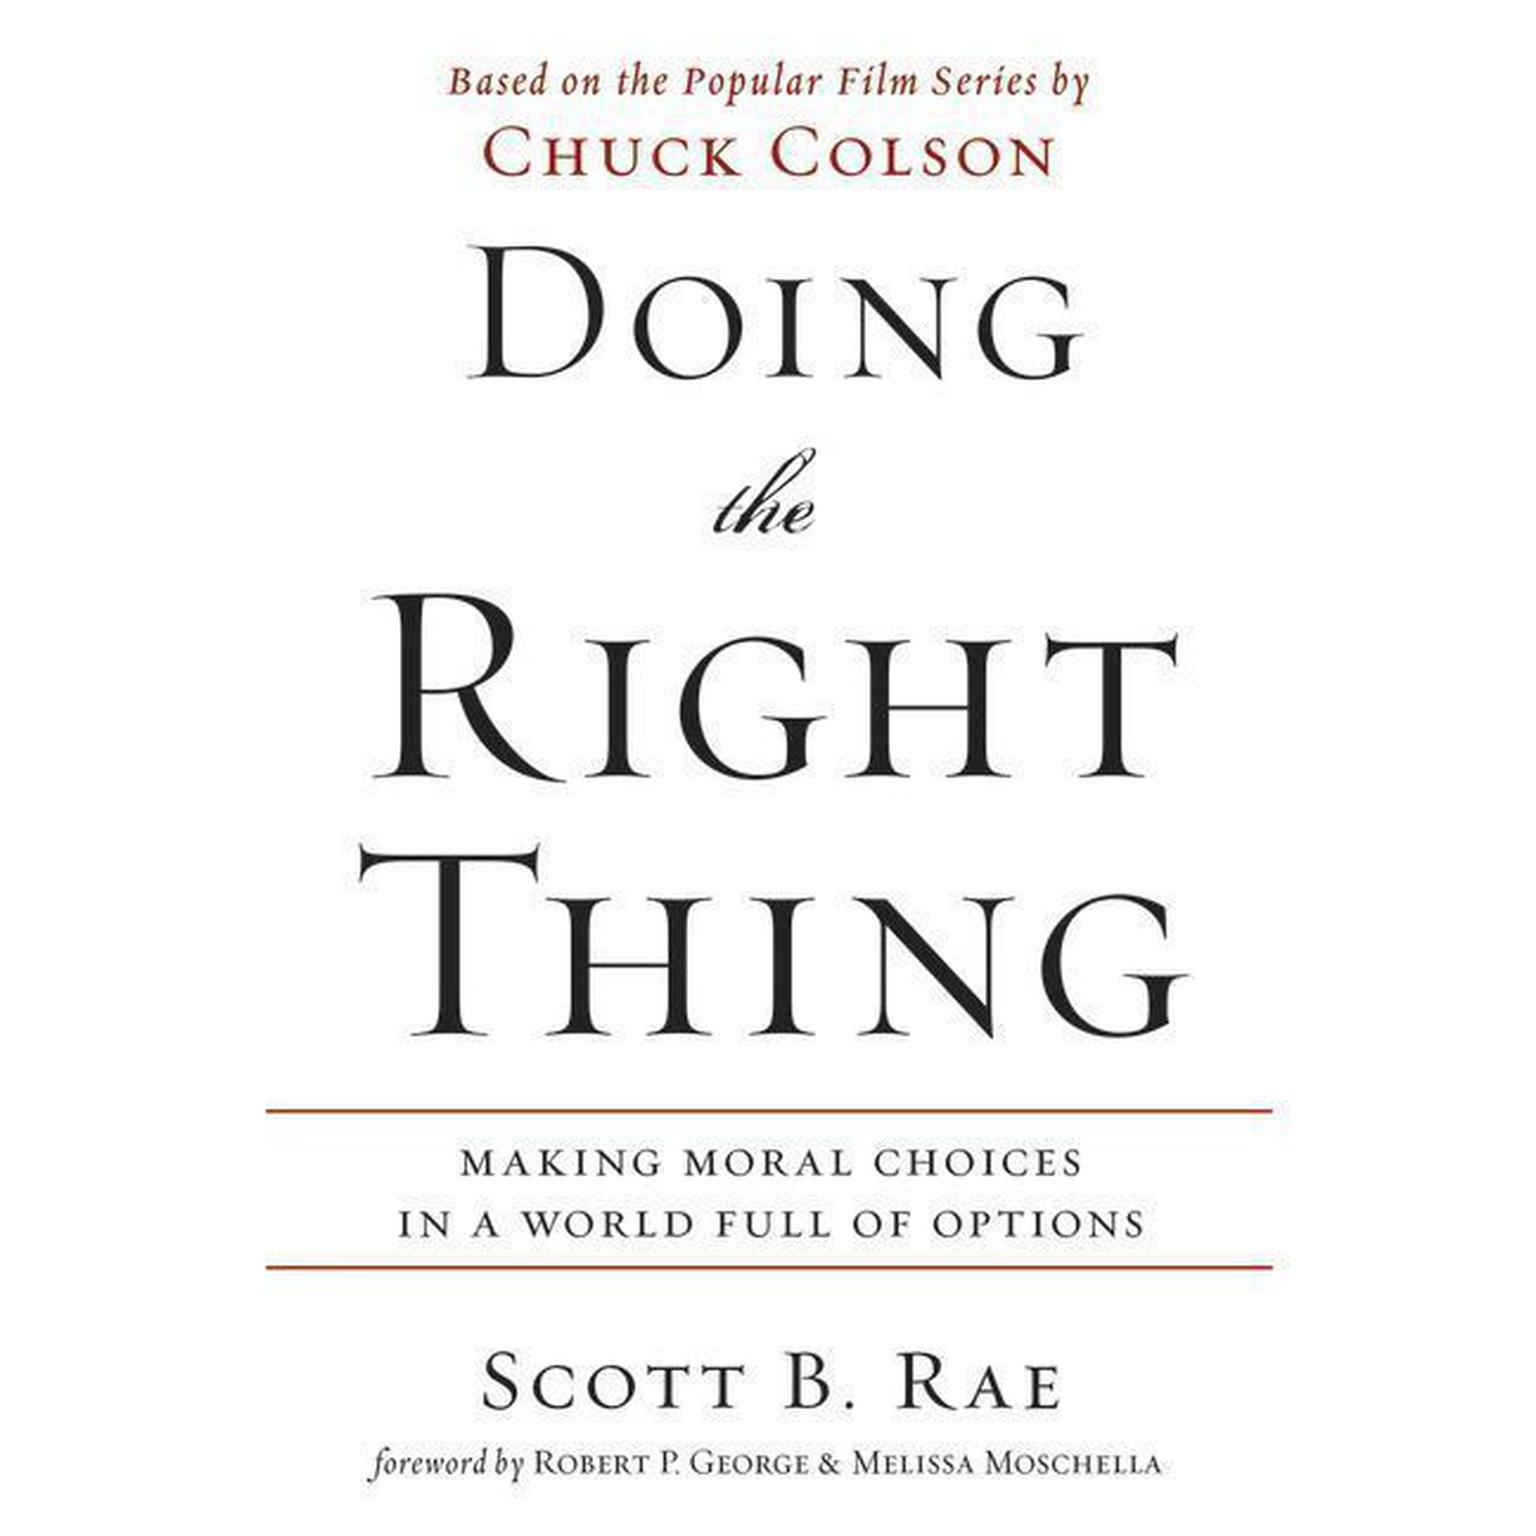 Doing the Right Thing: Making Moral Choices in a World Full of Options Audiobook, by Scott B. Rae